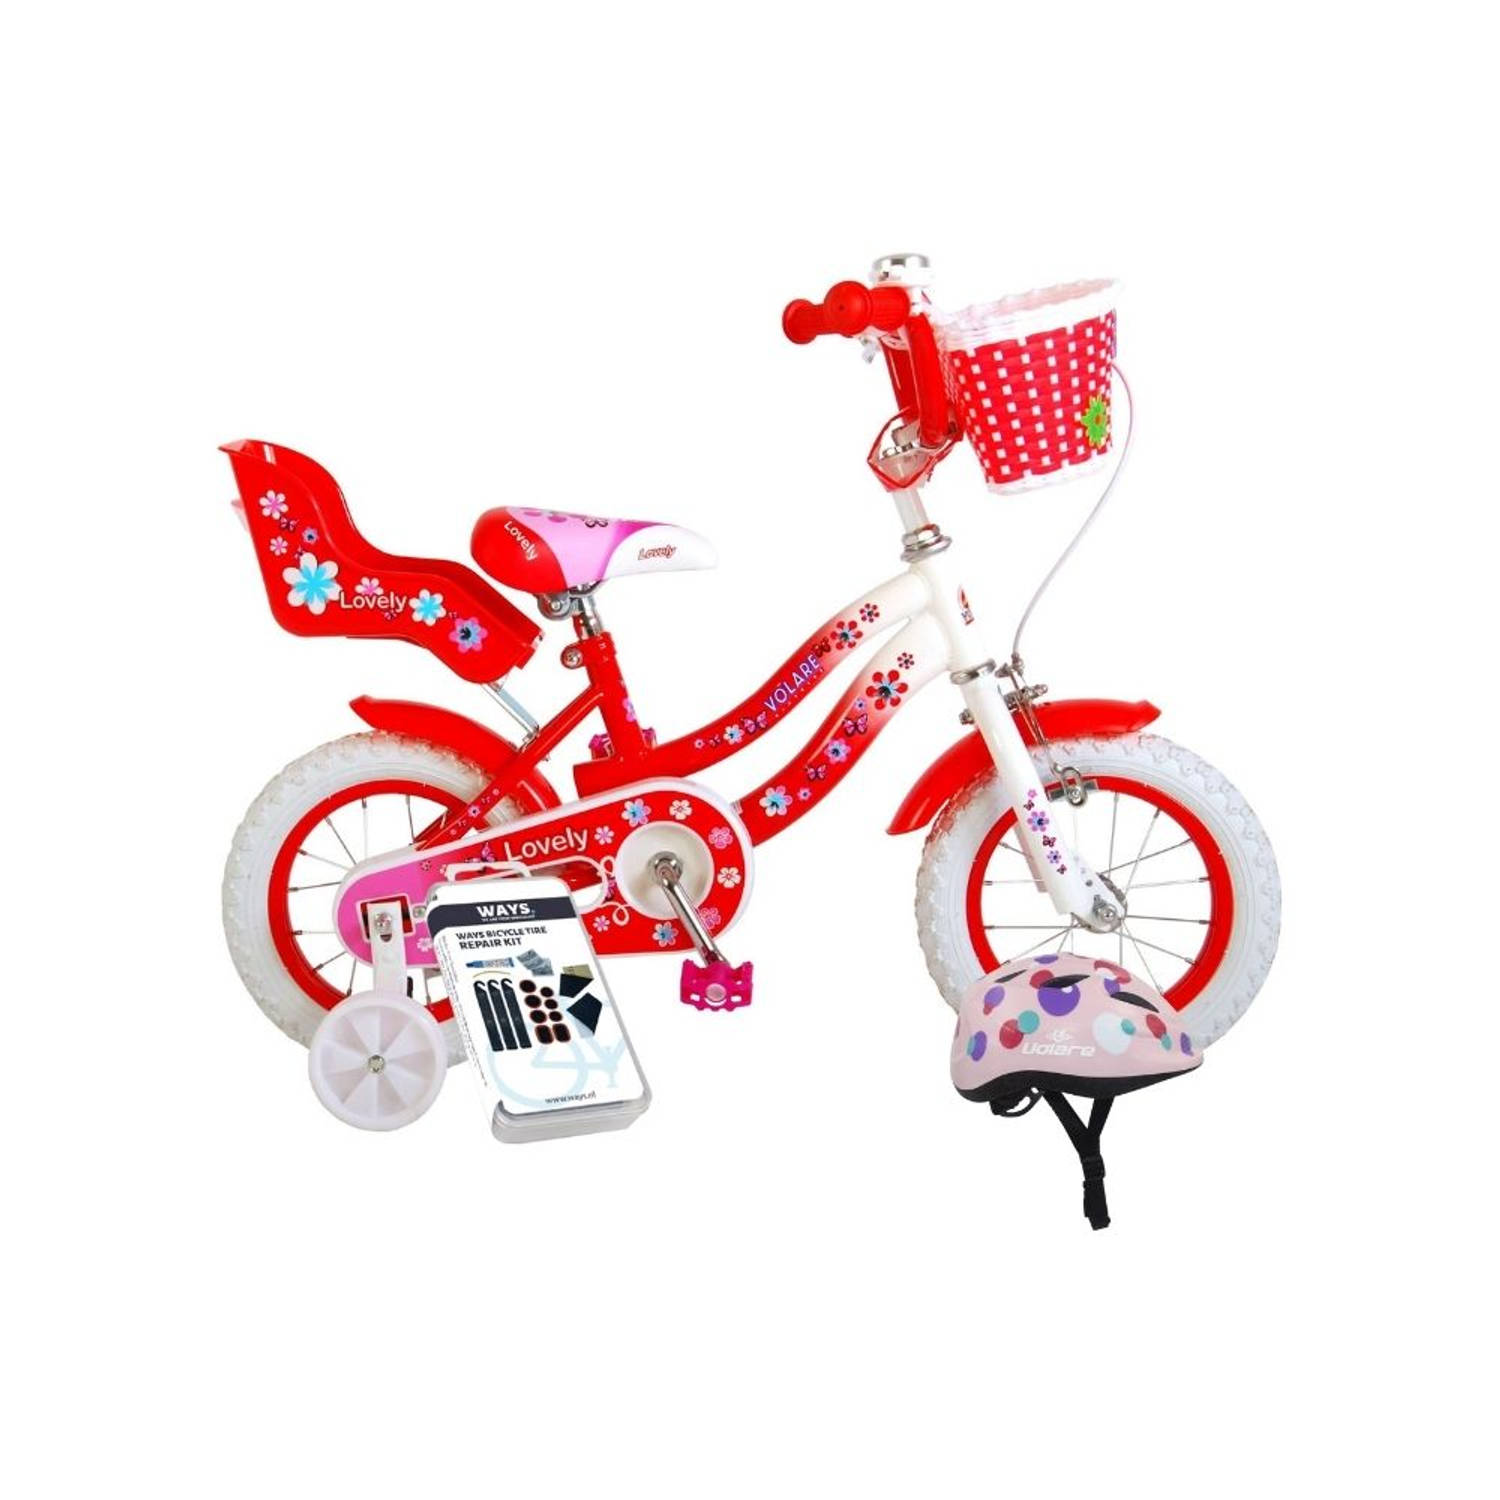 Volare Kinderfiets Lovely - 12 inch - Rood/Wit - Inclusief fietshelm & accessoires